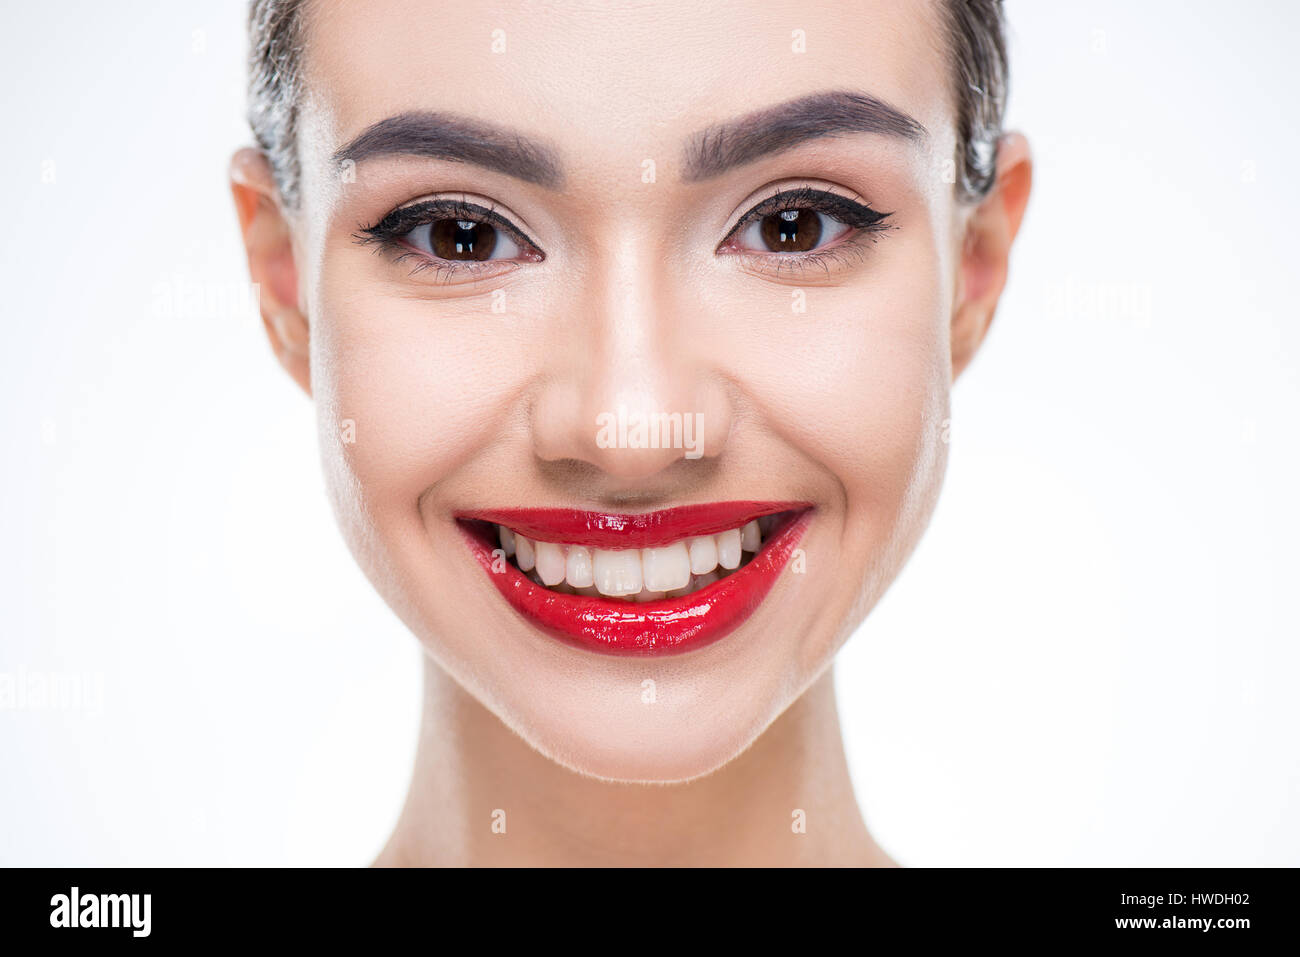 Portrait of beautiful woman with juicy red lips smiling isolated on white Stock Photo